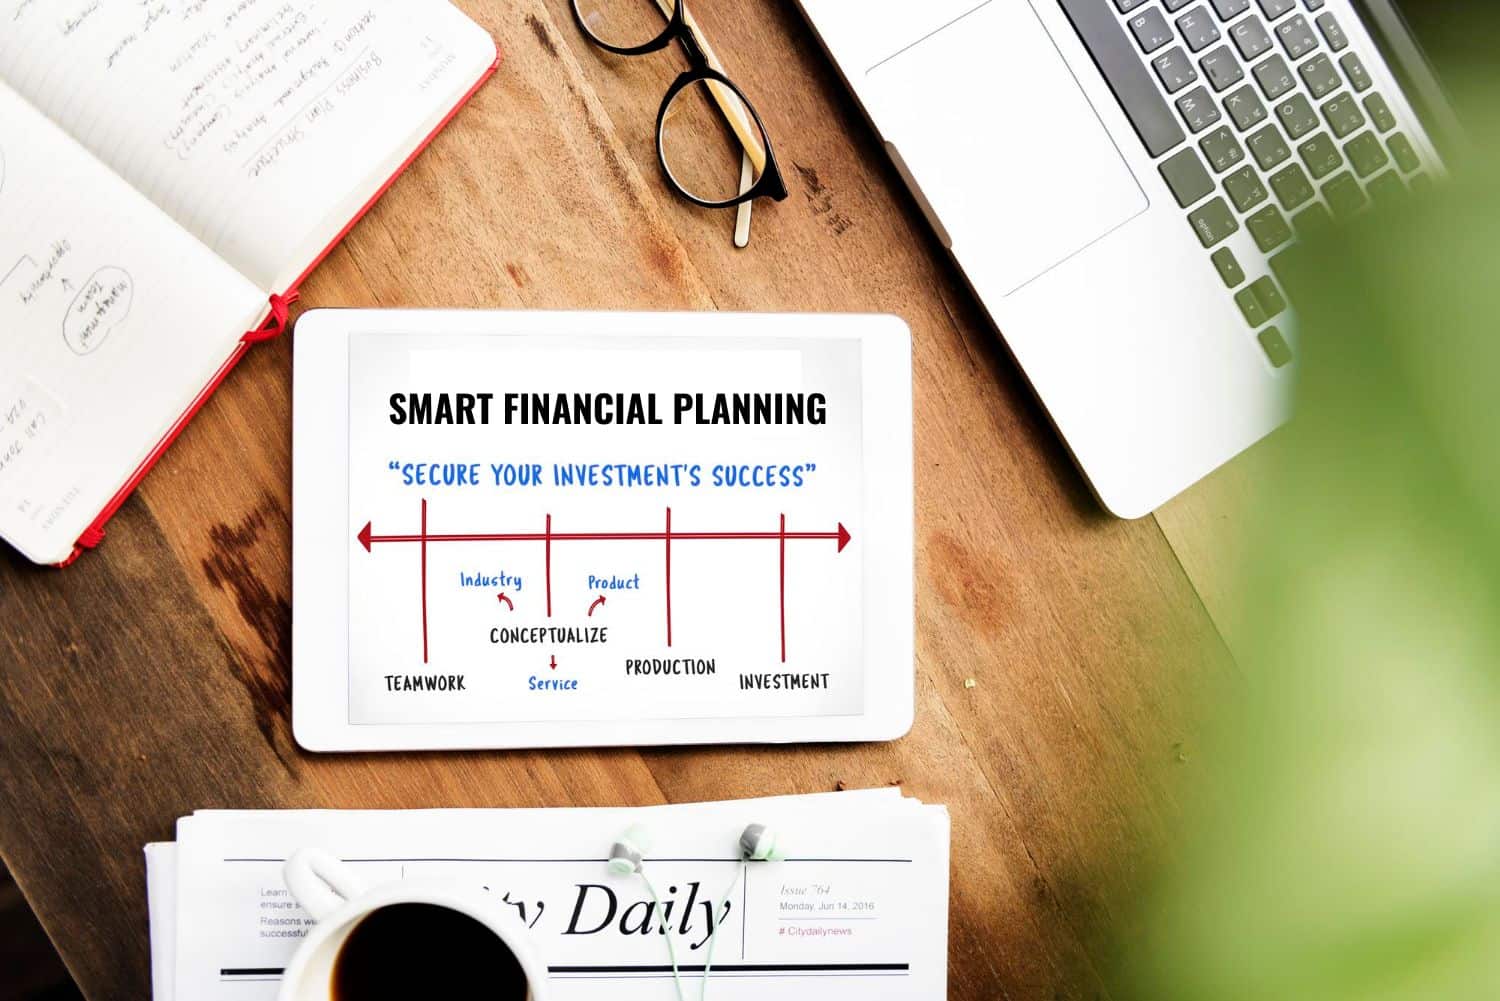 Sample tools and templates for smart financial planning